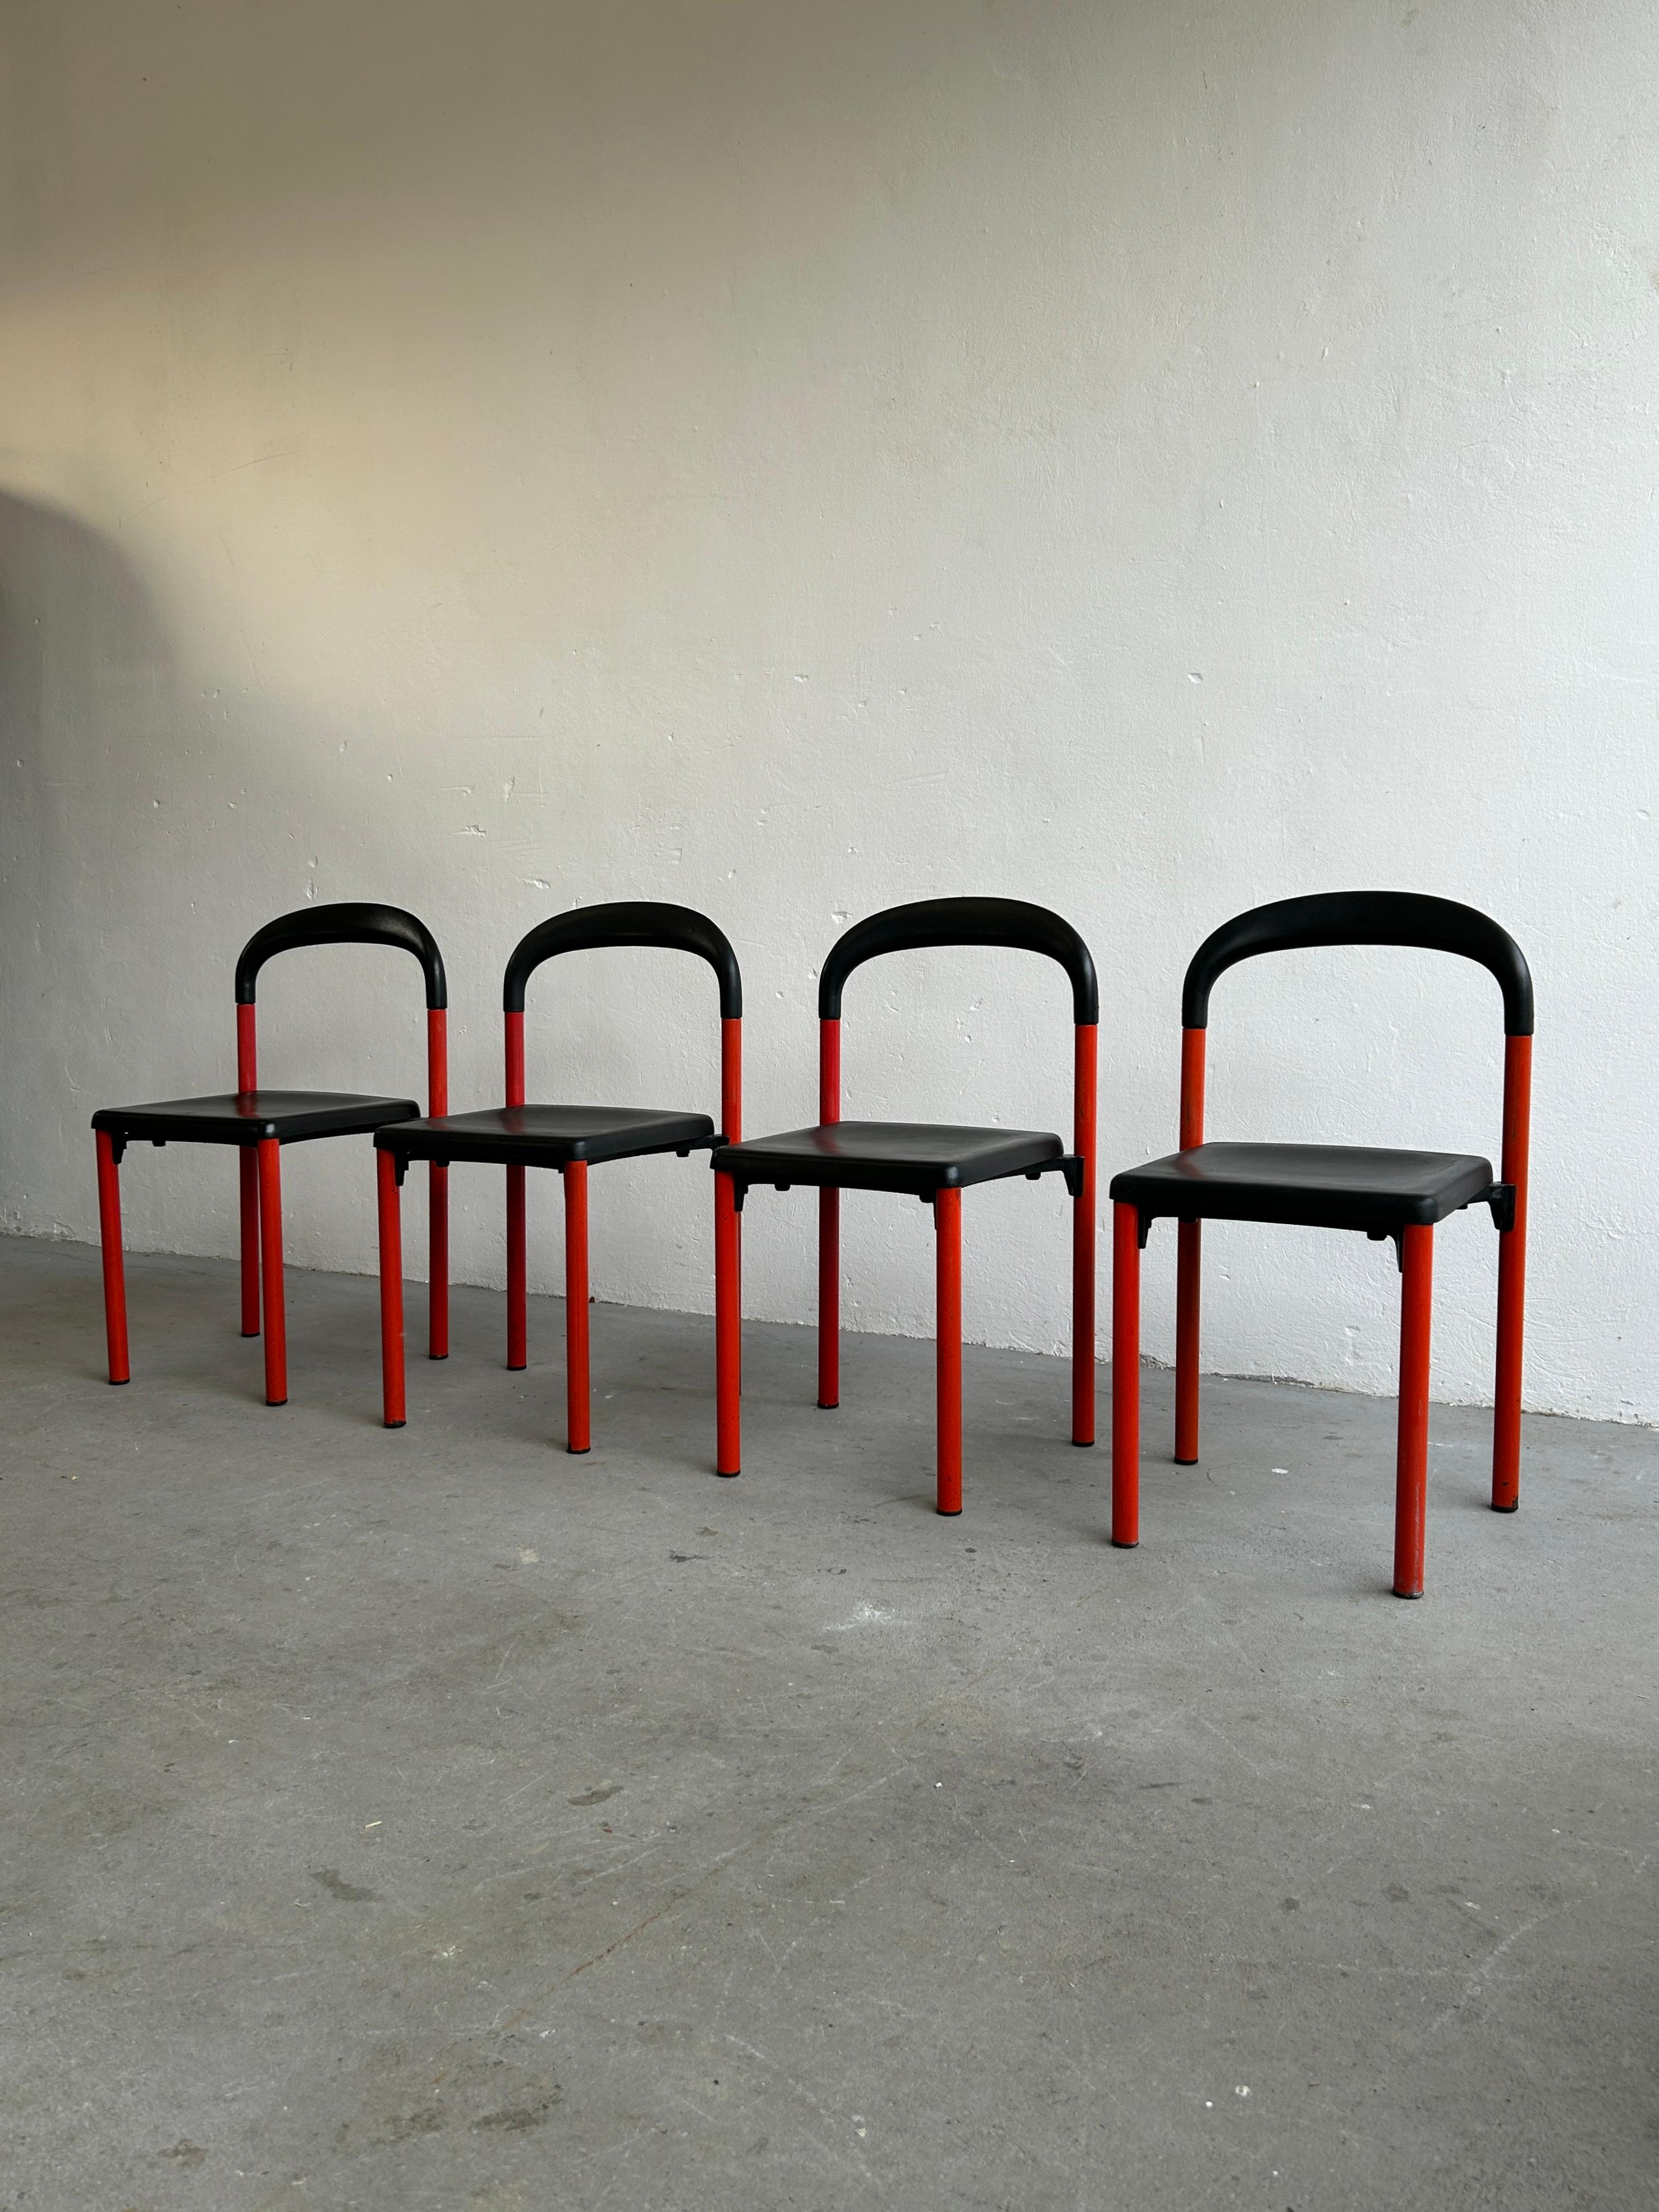 A set of 4 'Modres' vintage postmodern chairs, designed by Mladen Oresic and produced by TMN Jadran from 1983 onwards in former Yugoslavia. Minimalist modernist design, following the style of 501 Göteborg Chairs by Cassina.

Modres was designed